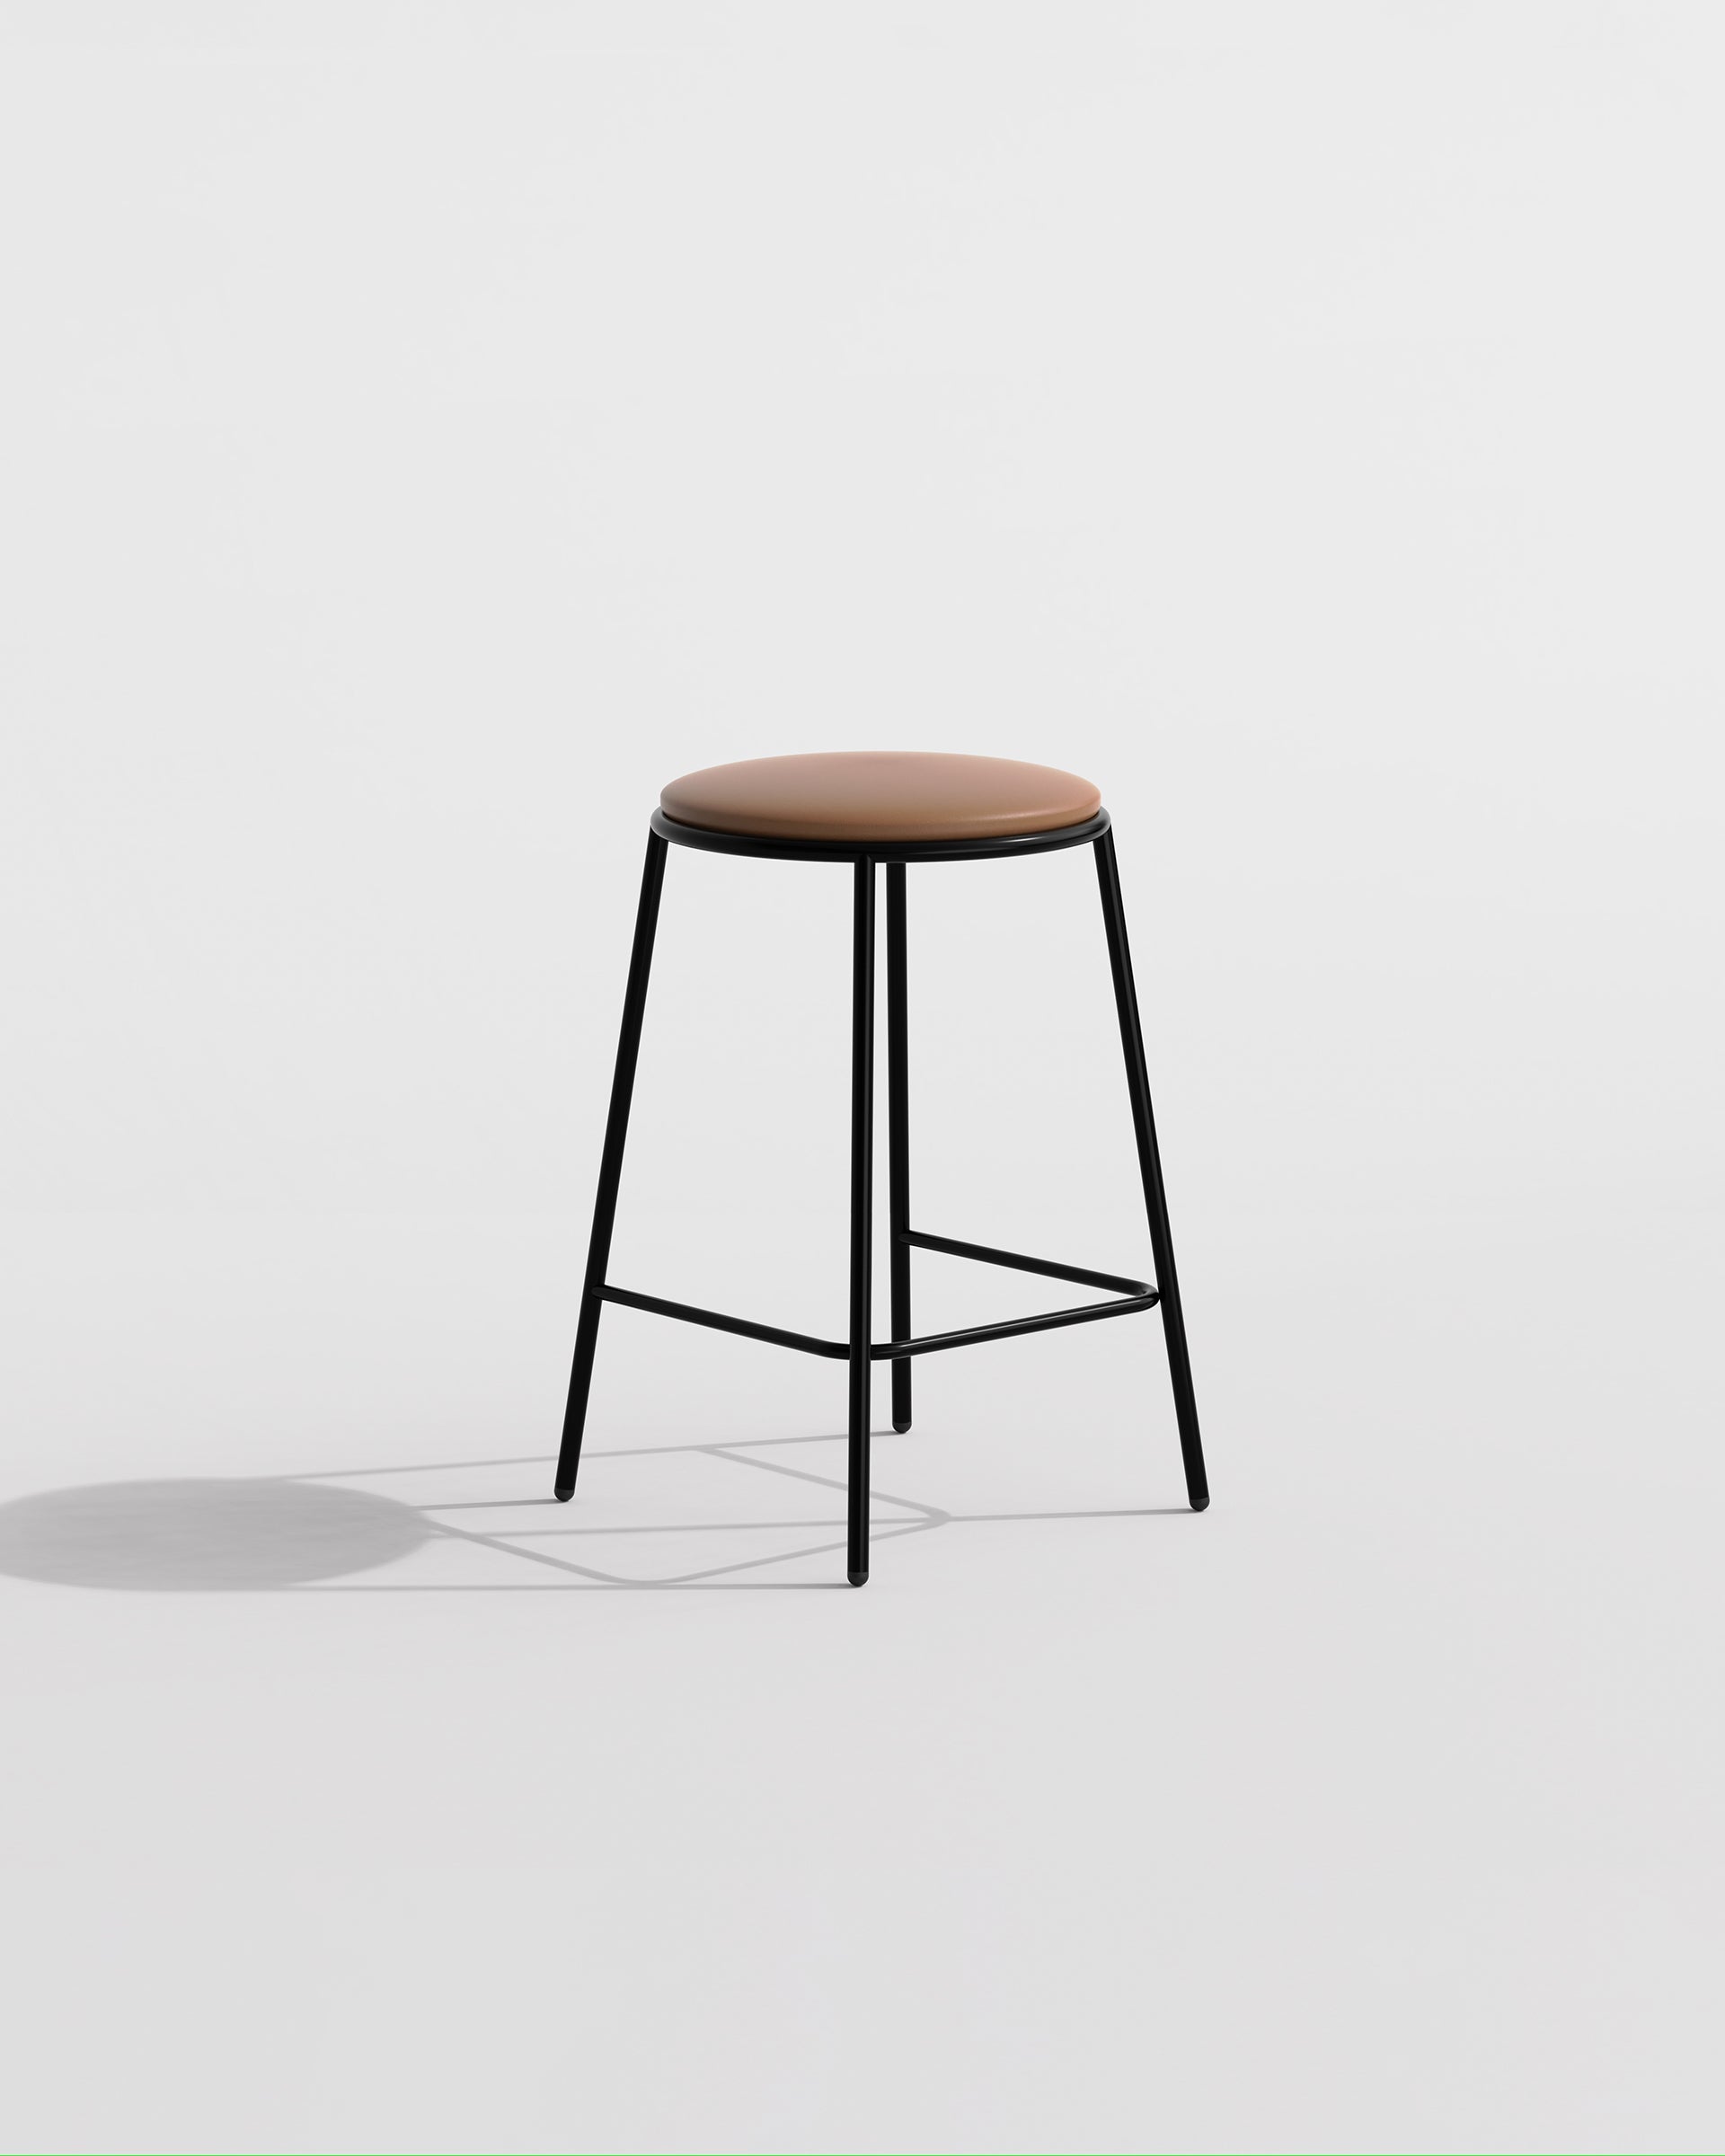 Piper Bar Counter Stool Upholstered | Fabric or Leather Seat | Designed by GibsonKarlo | DesignByThem